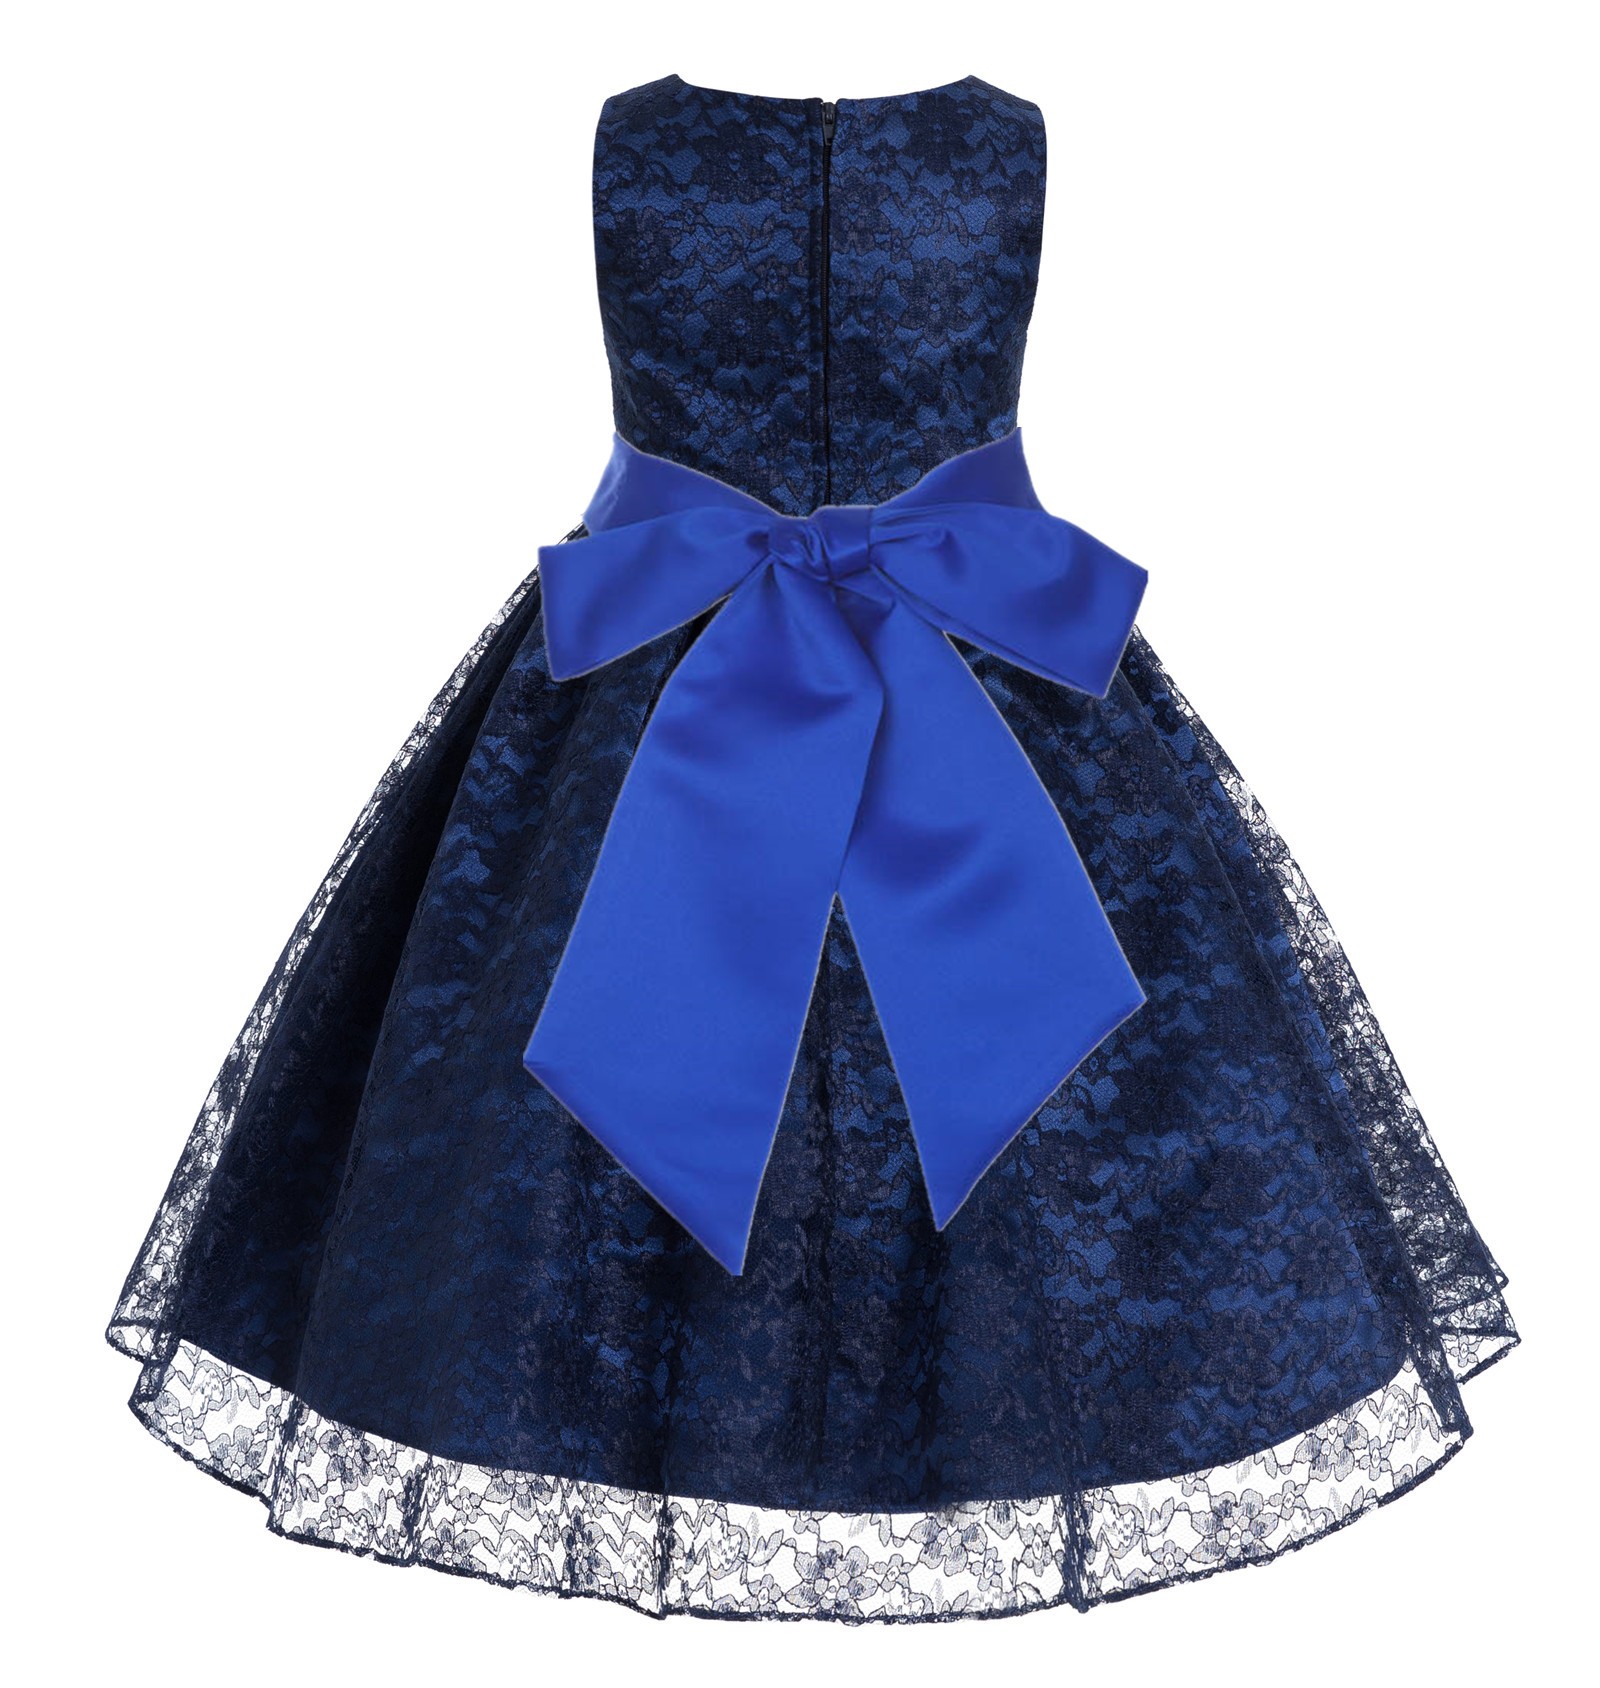 Navy / Horizon Floral Lace Overlay Flower Girl Dress Lace Dresses 163s